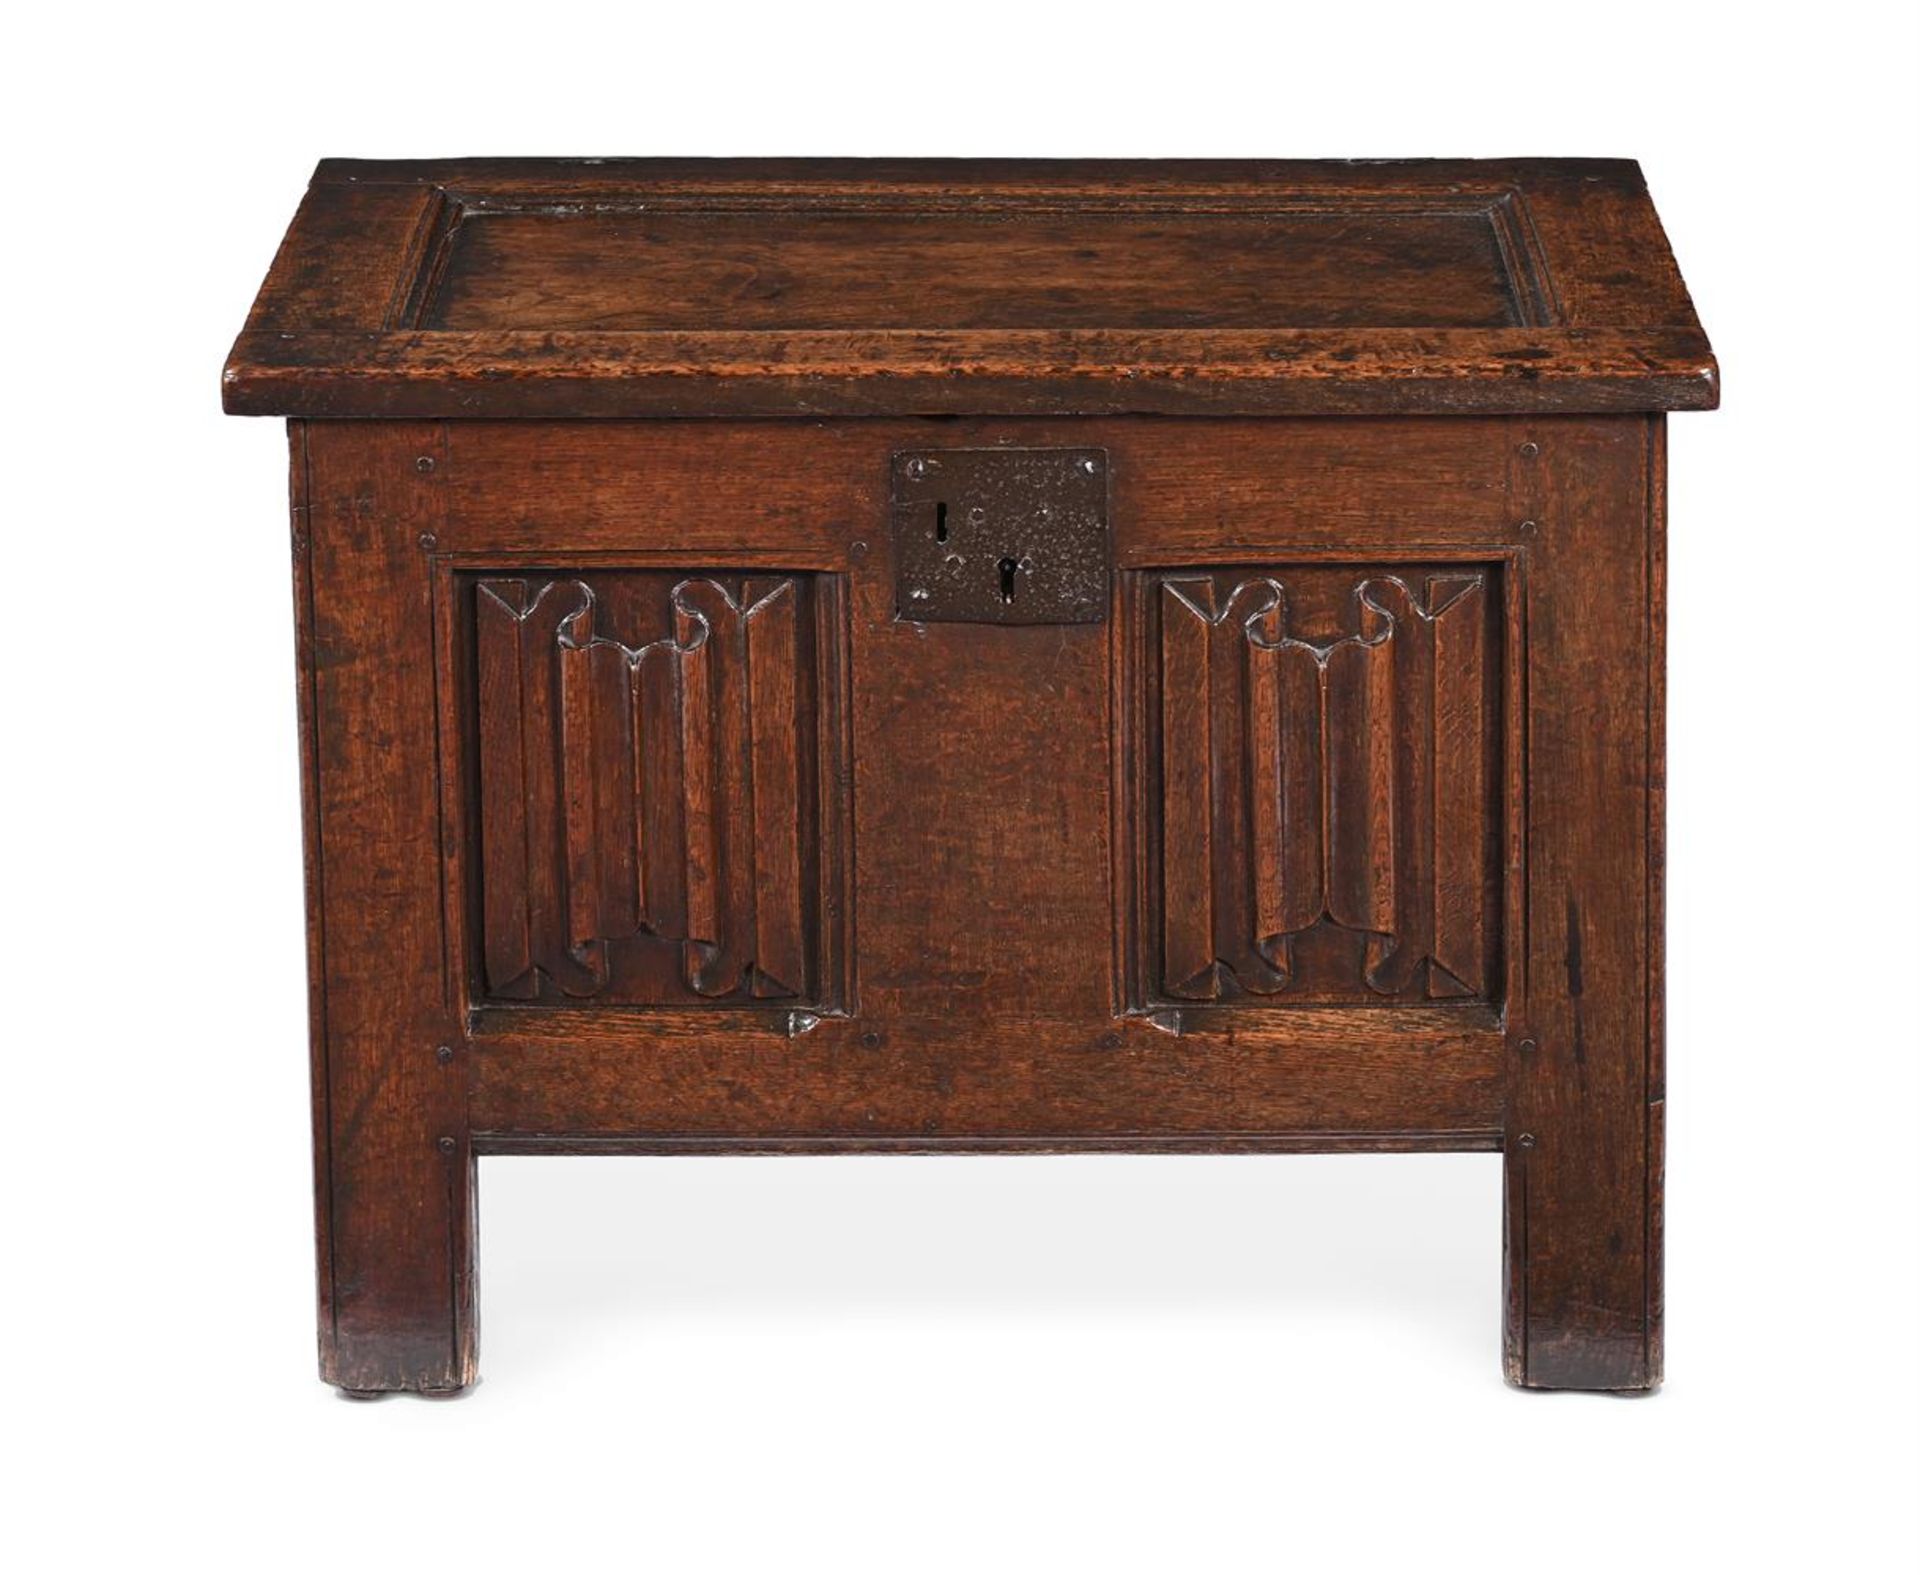 A SMALL ELIZABETHAN OAK COFFER, LATE 16TH OR EARLY 17TH CENTURY